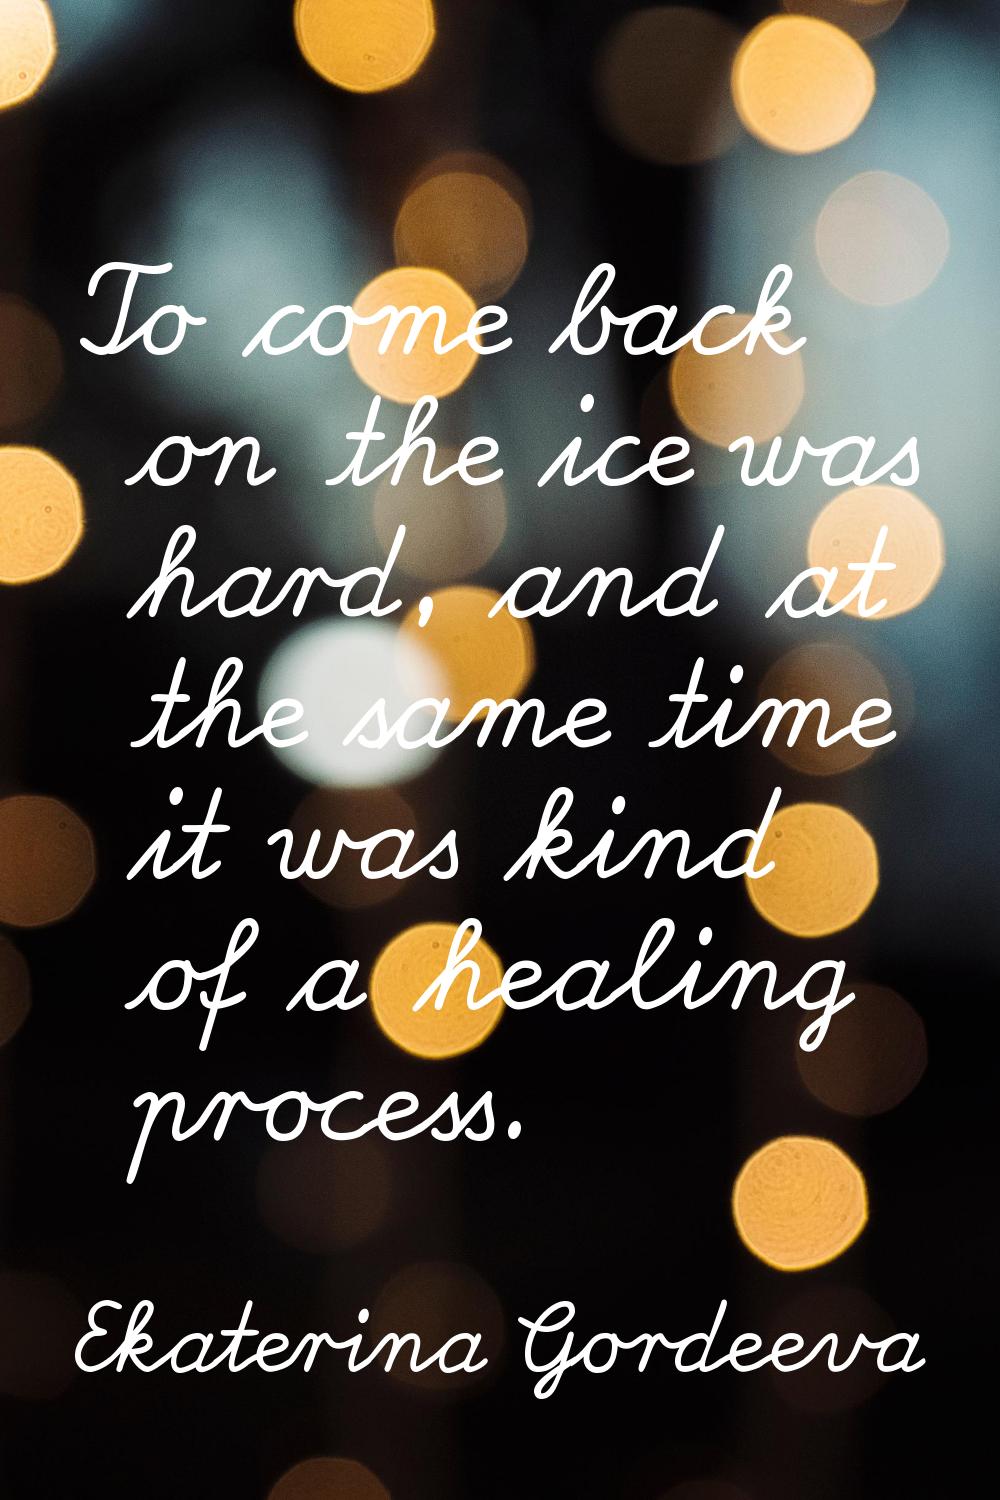 To come back on the ice was hard, and at the same time it was kind of a healing process.